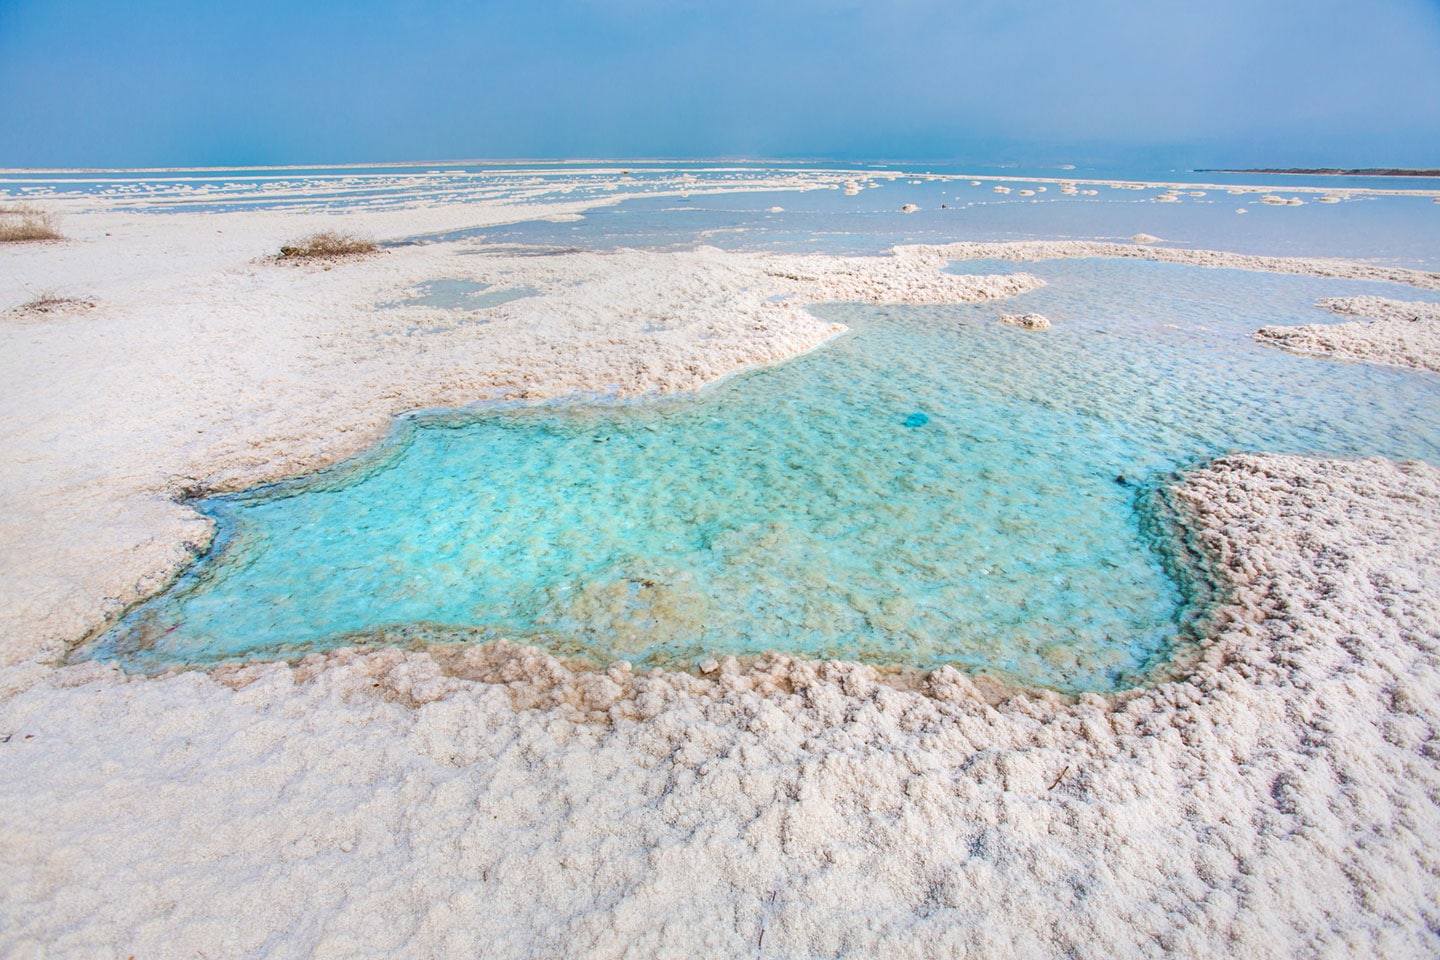 Salt formations at the Dead Sea in Israel